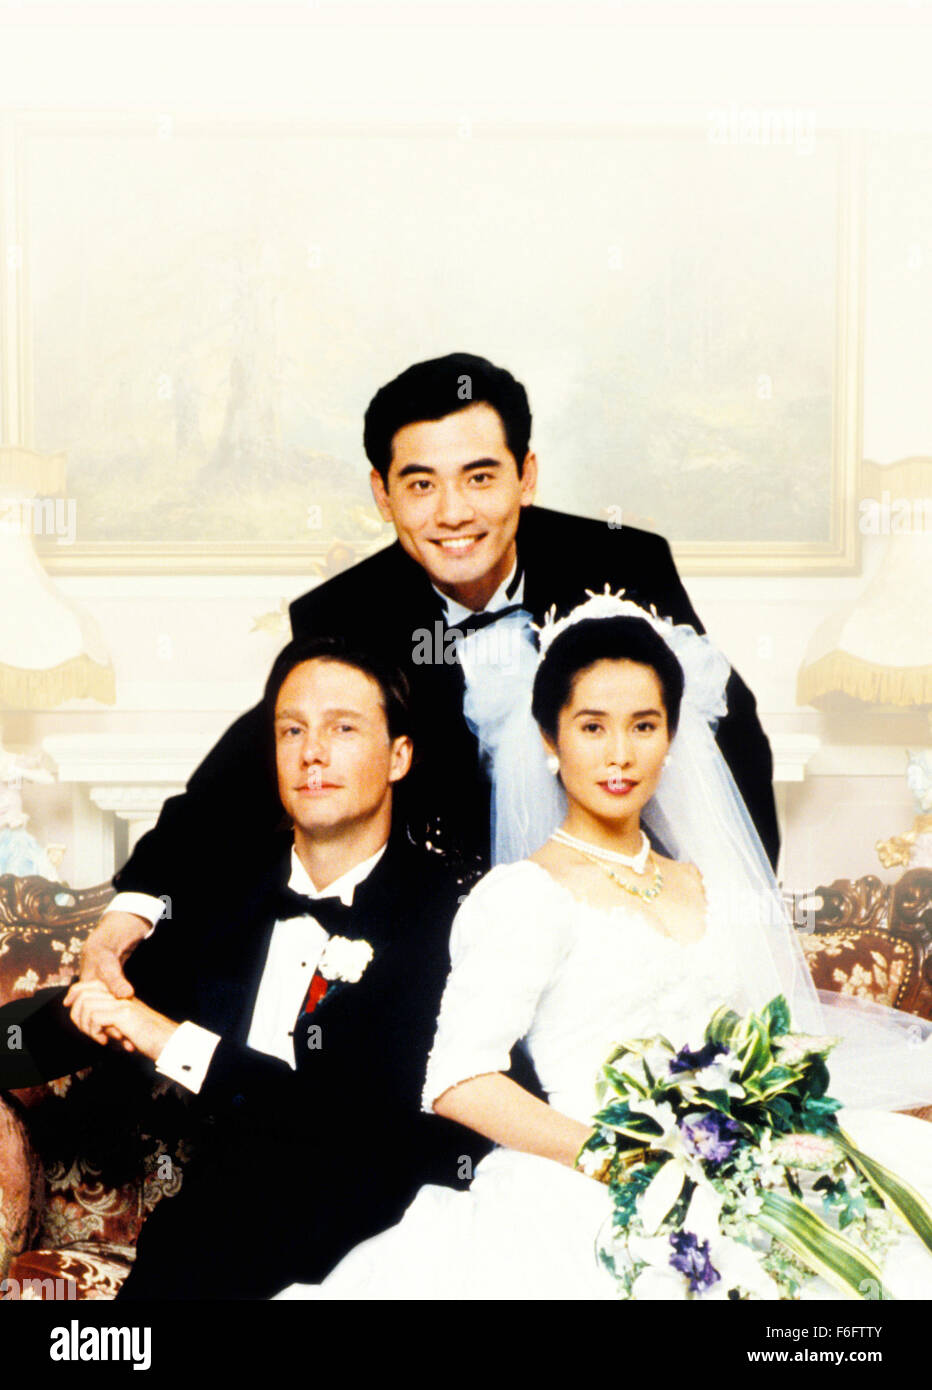 RELEASE DATE: Aug 04, 1993. MOVIE TITLE: The Wedding Banquet aka Hsi yen. STUDIO: The Samuel Goldwyn Company. PLOT: A gay Taiwanese-American man is in a happy long term relationship in Manhattan, but his parents in Taiwan are always pressuring him to marry. His tenant, a young Chinese girl needs to marry an American citizen to obtain her green card, so a deal is made. Complications arise when the joyous parents arrive for the wedding and a huge cross-cultural banquet is arranged to celebrate. PICTURED: MITCHELL LICHTENSTEIN as Simon, WINSTON CHAO as Wai-Tung Gao, MAY CHIN as Wei-Wei, Movie Art Stock Photo